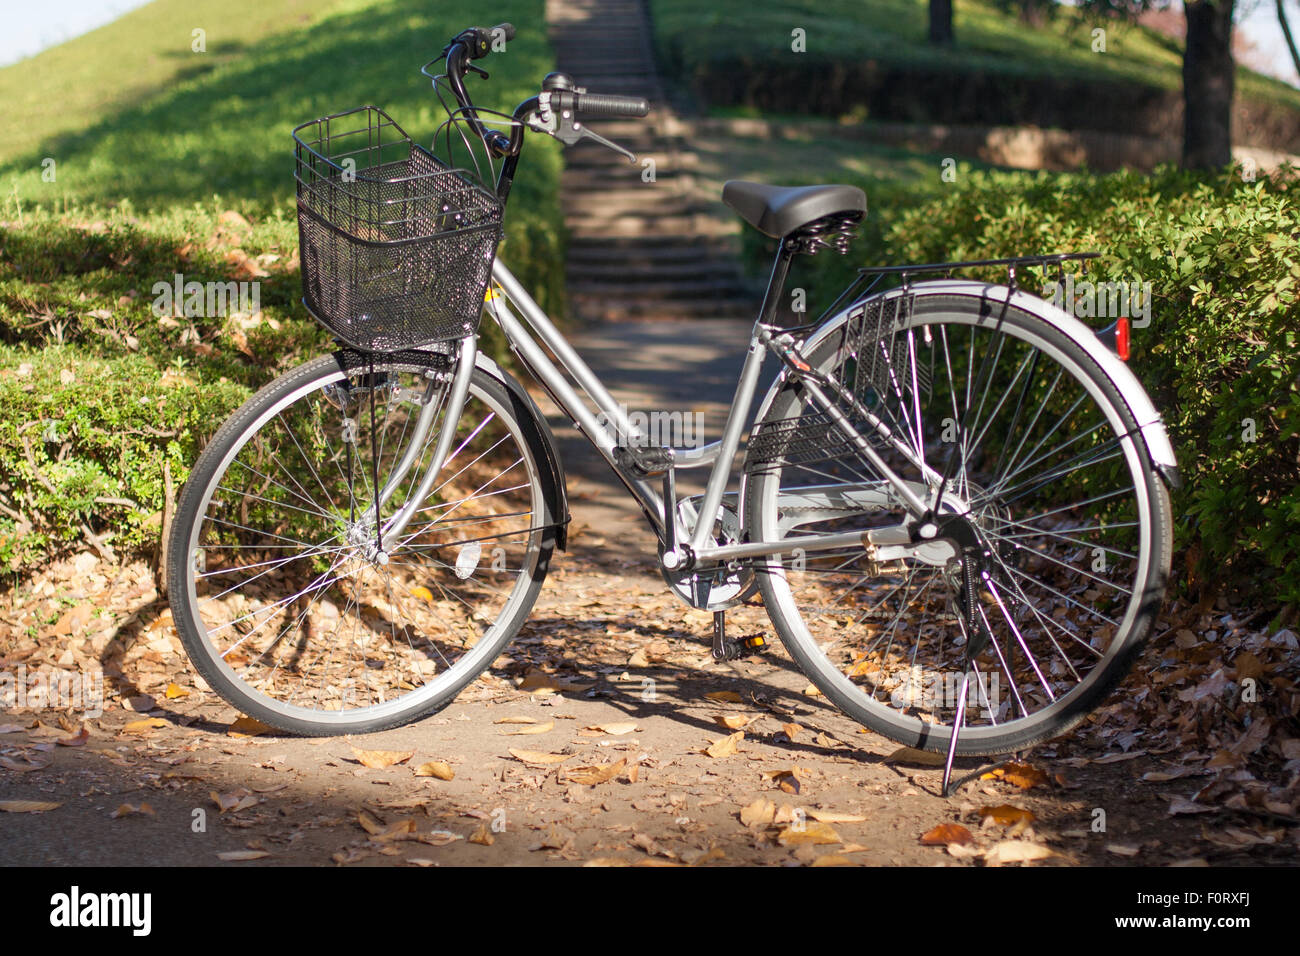 Japanese bike bicycle with front basket and back rack Stock Photo - Alamy